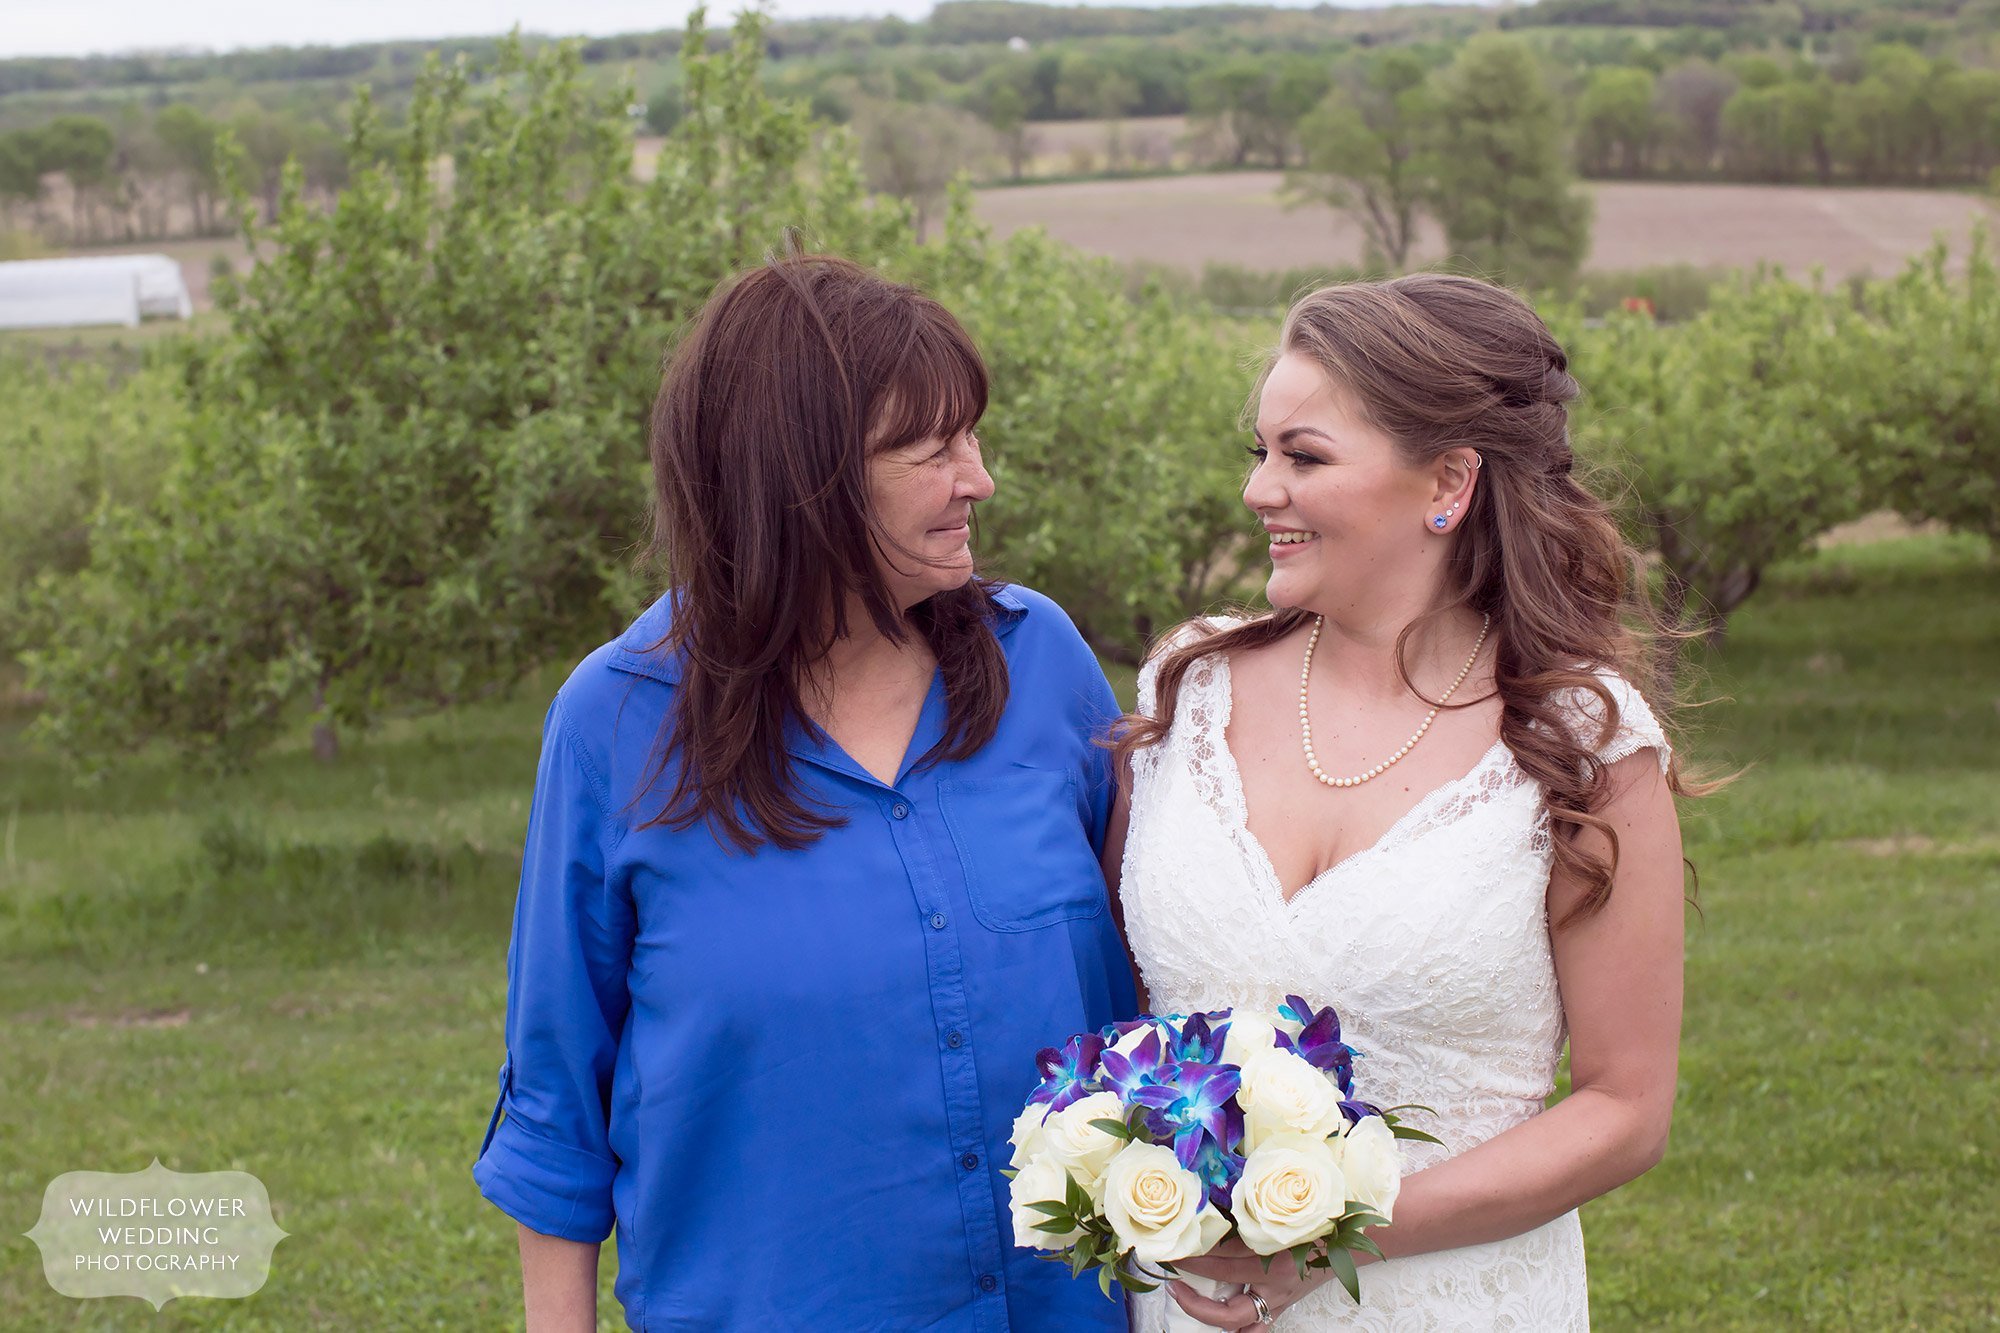 Sweet photo of the bride and her mom in the orchard at this farm wedding in MO.